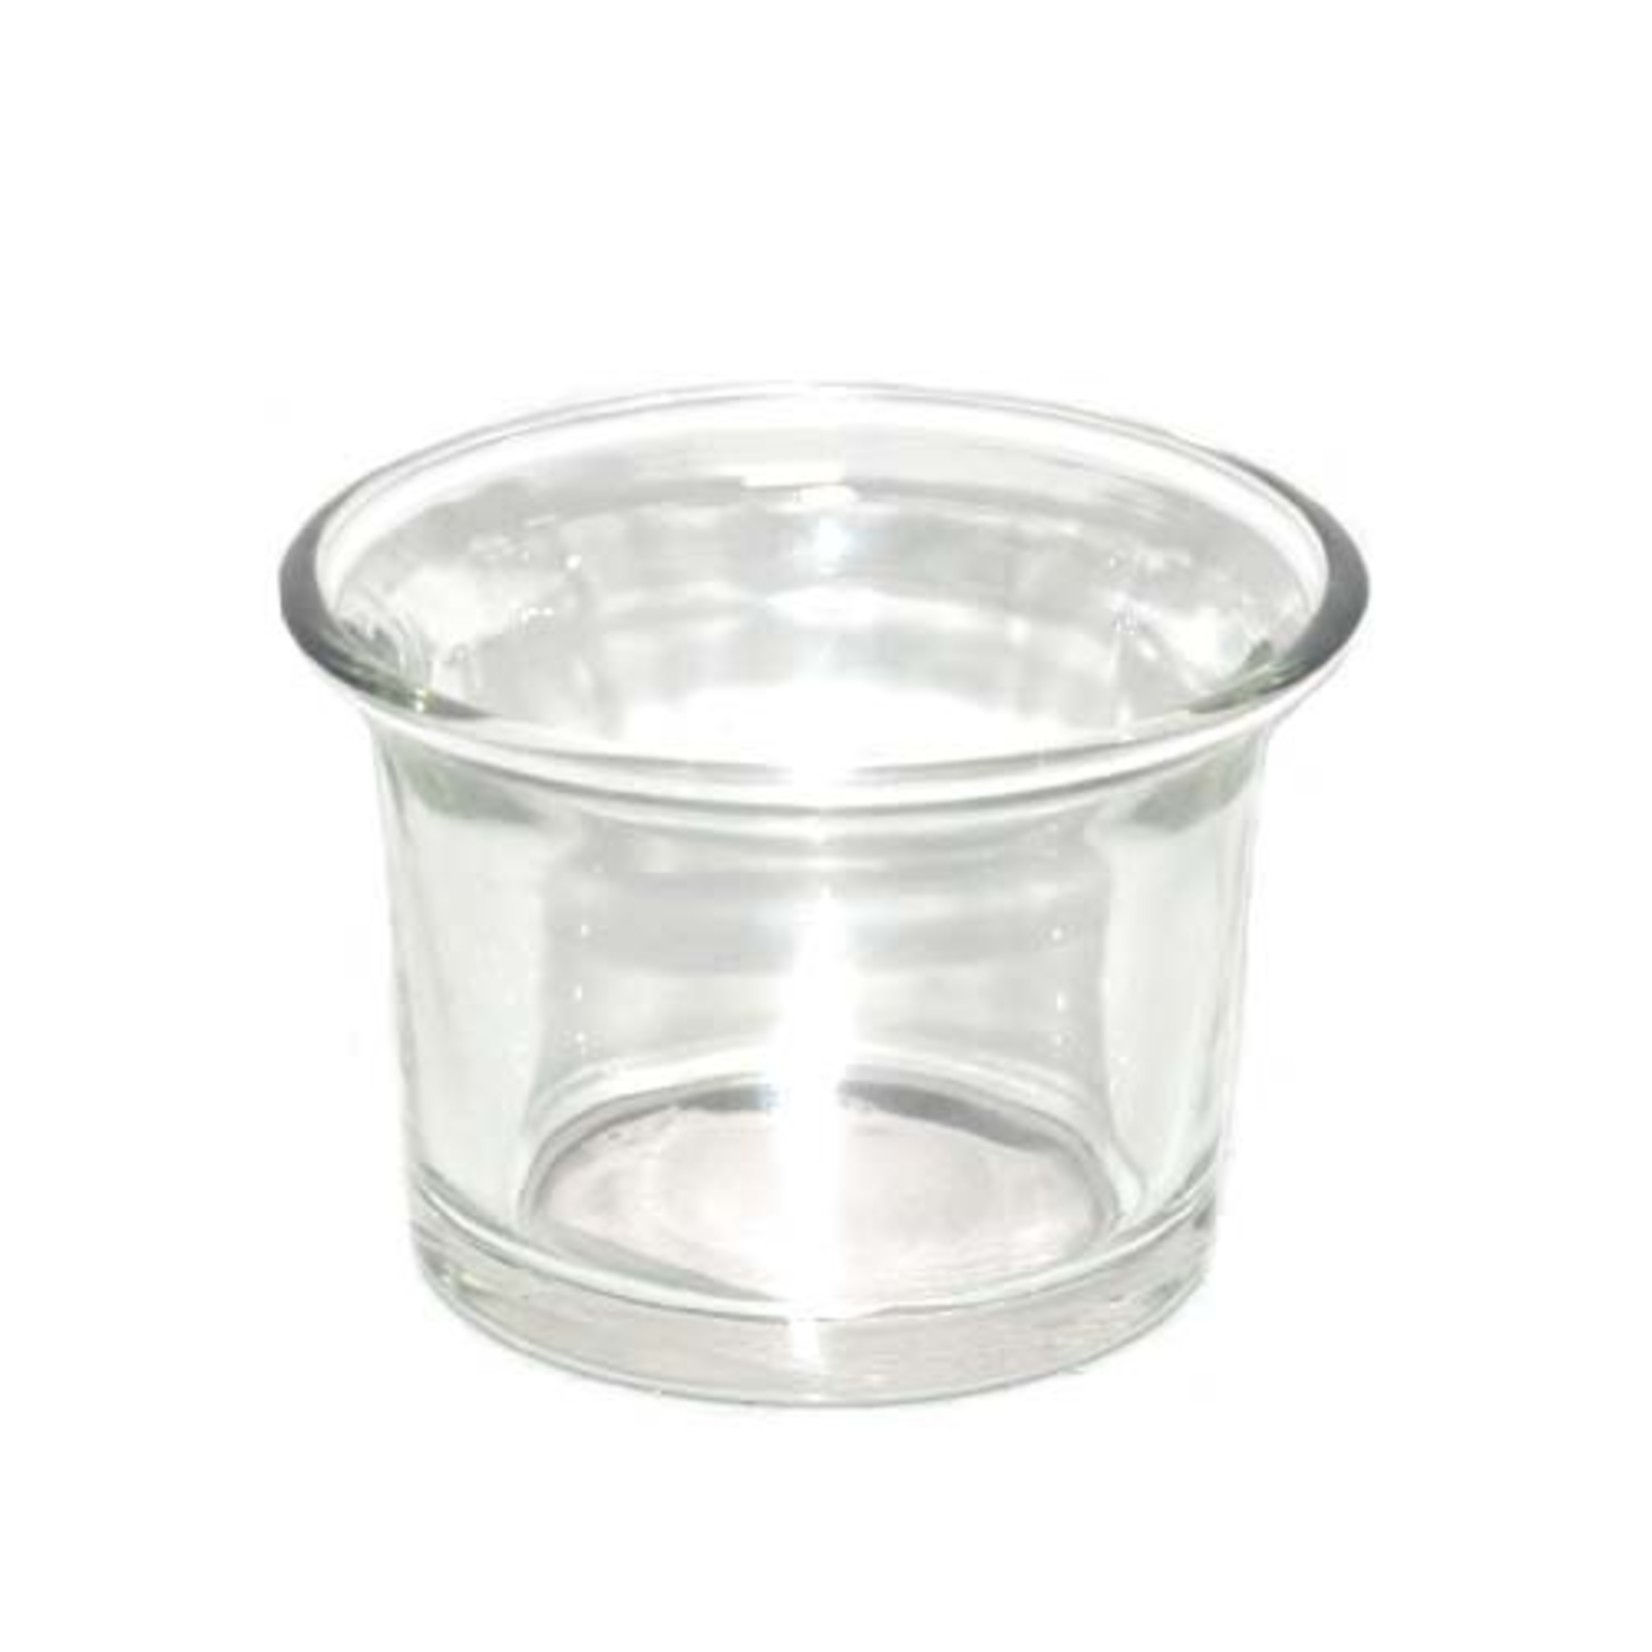 CLEAR GLASS CANDLE HOLDER, 5"